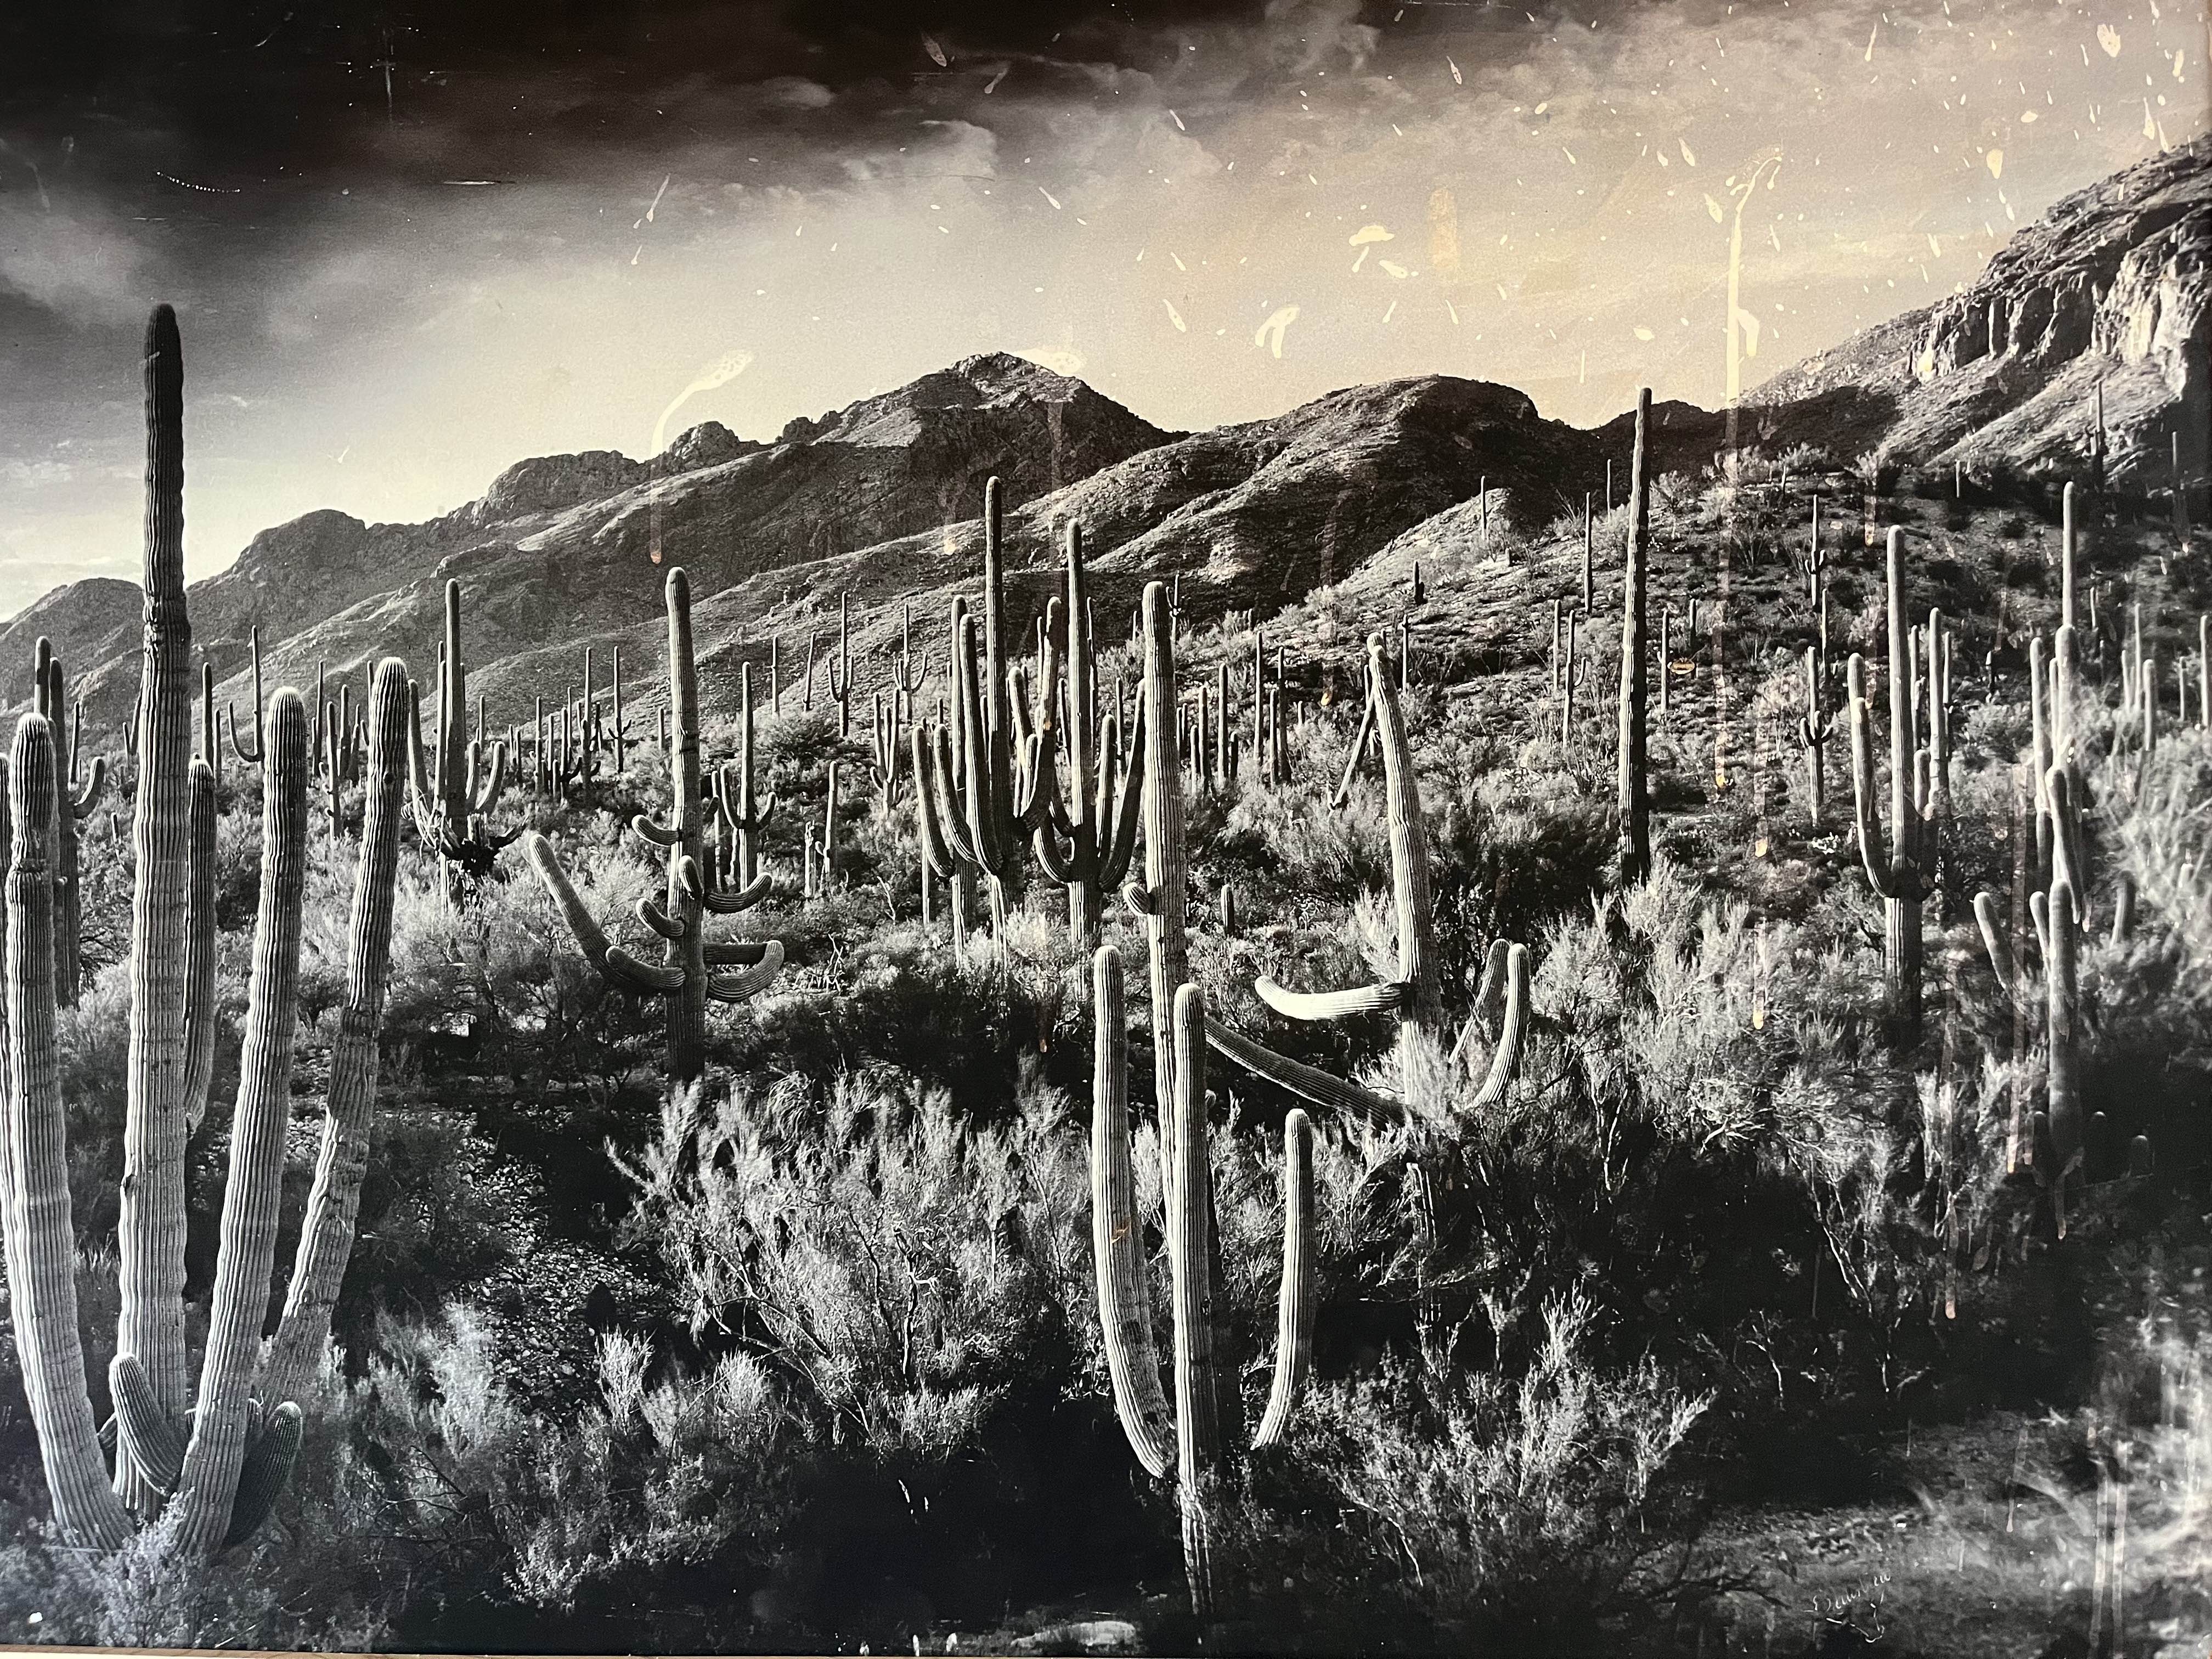 Mountains with Saguaro cacti in the Sonoran desert